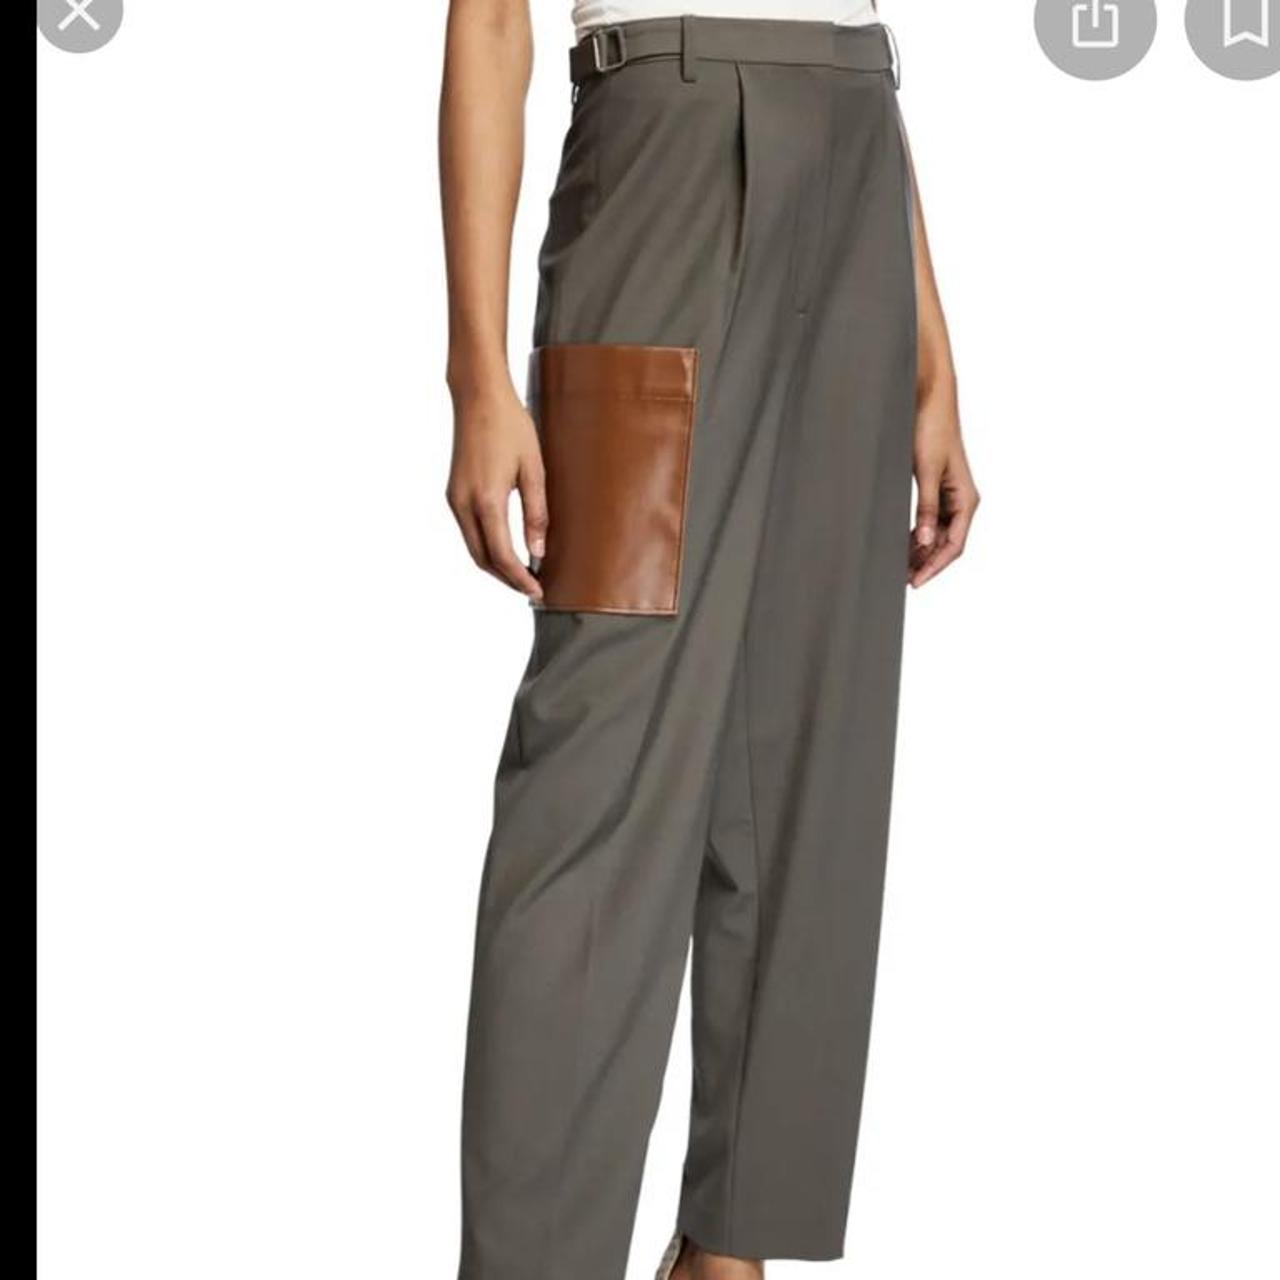 Tibi Women's Grey and Brown Trousers